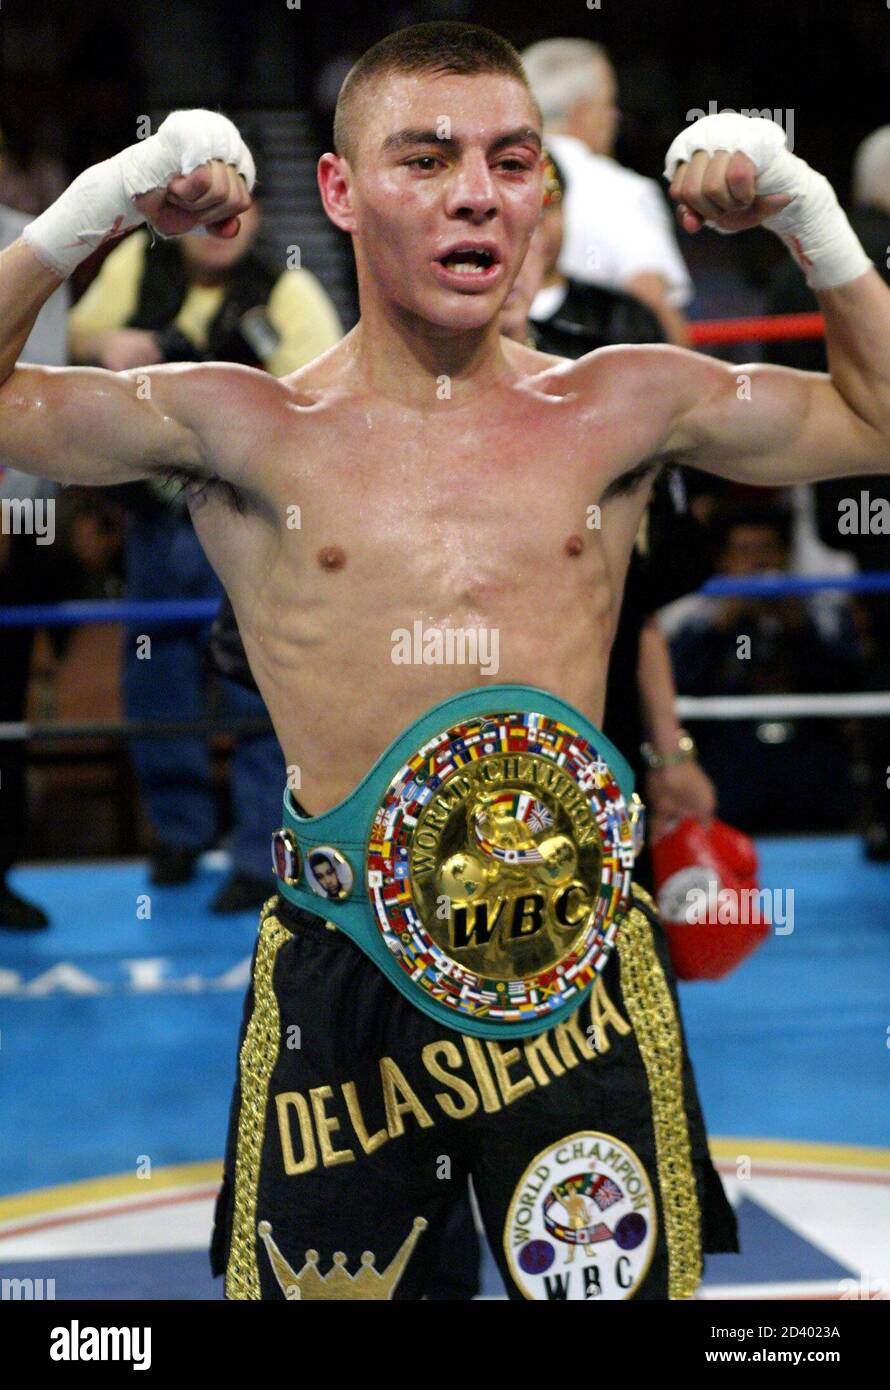 WBC light flyweight champion Jorge Arce of Los Mochis, Mexico, poses with his belt after retaining his title against [Agustin Luna of Mexico City with a third round TKO, at the Mandalay Bay Events Center in Las Vegas, Nevada, November 16, 2002. Arce improves his record to 31-3-1.] Stock Photo